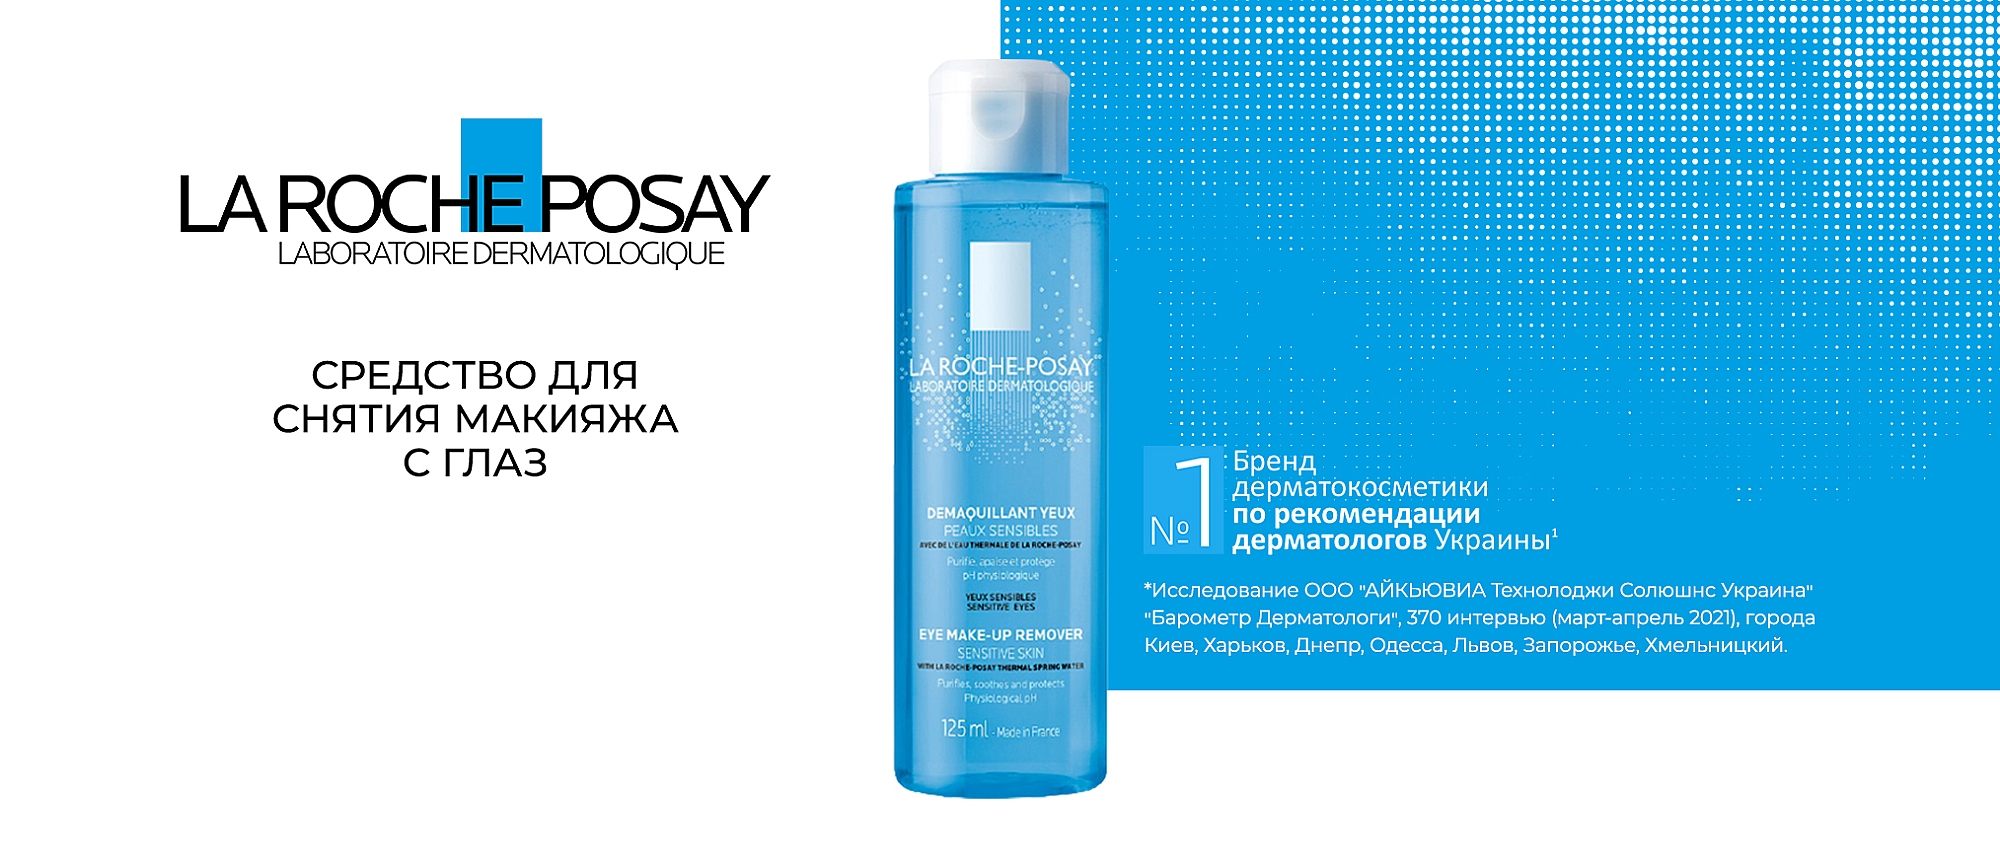 La Roche-Posay Physiological Eye Make-up Remover